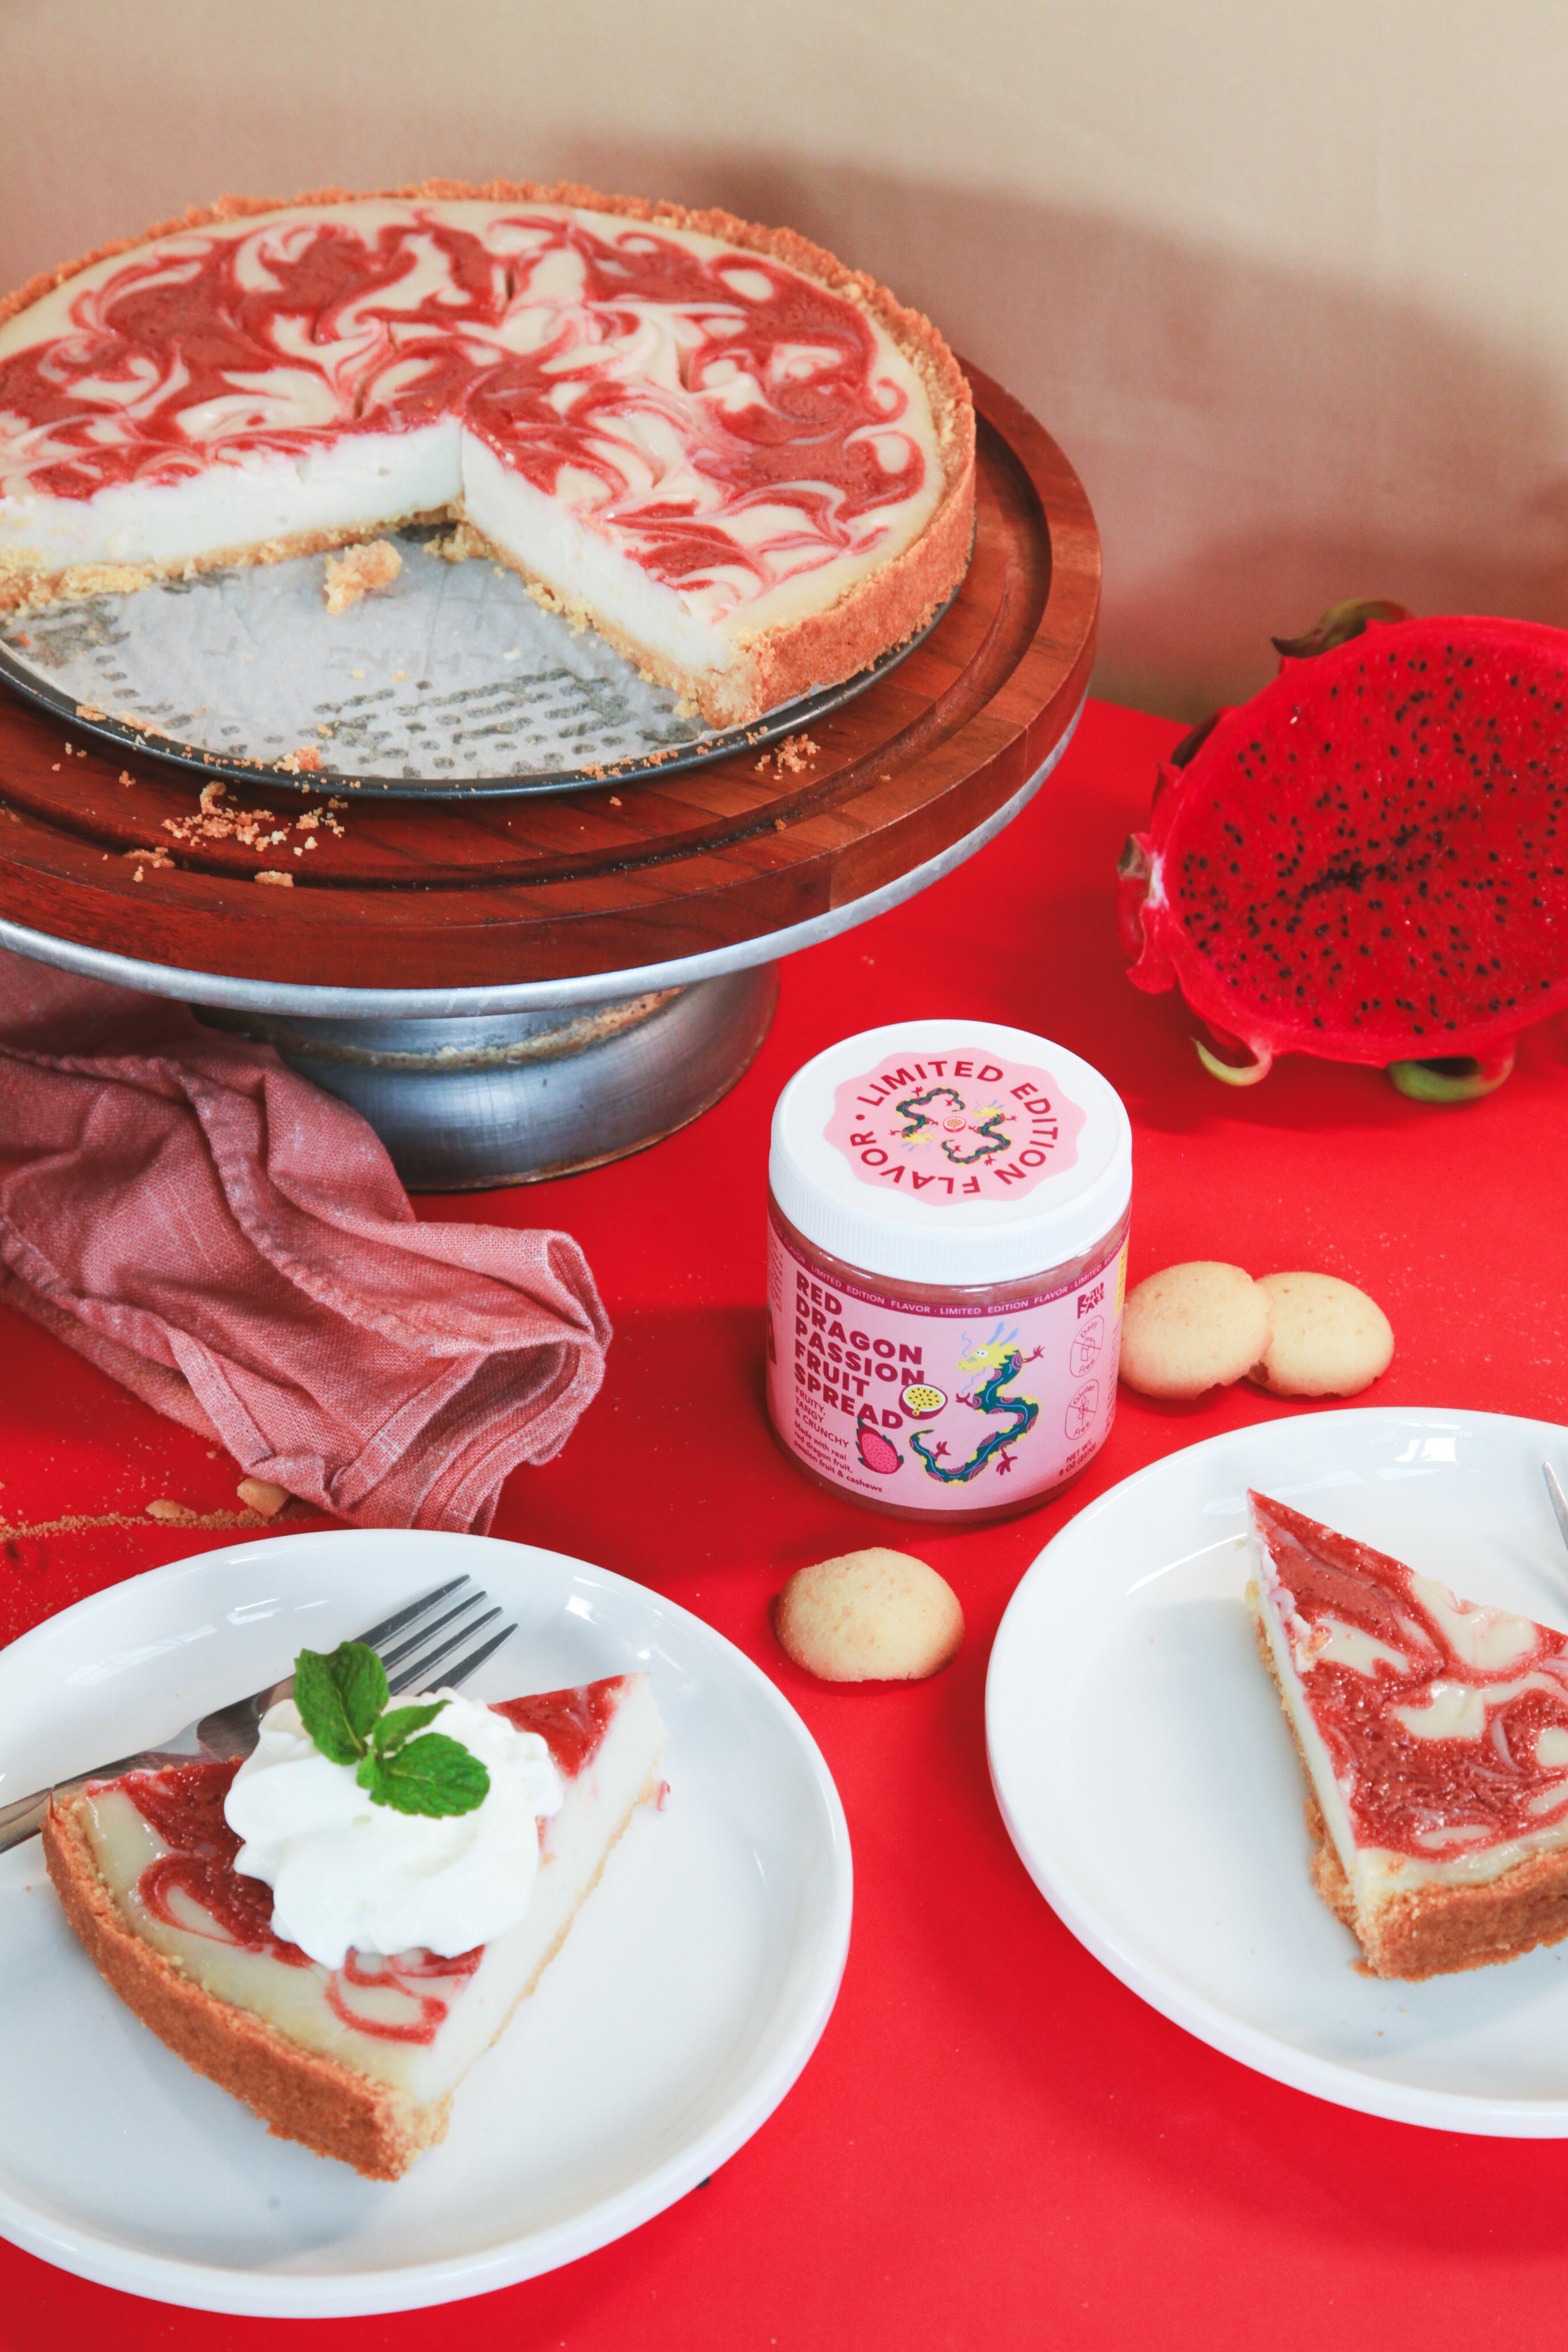 Red Dragon Passion Fruit Spread (Limited-Edition Lunar New Year Flavor)